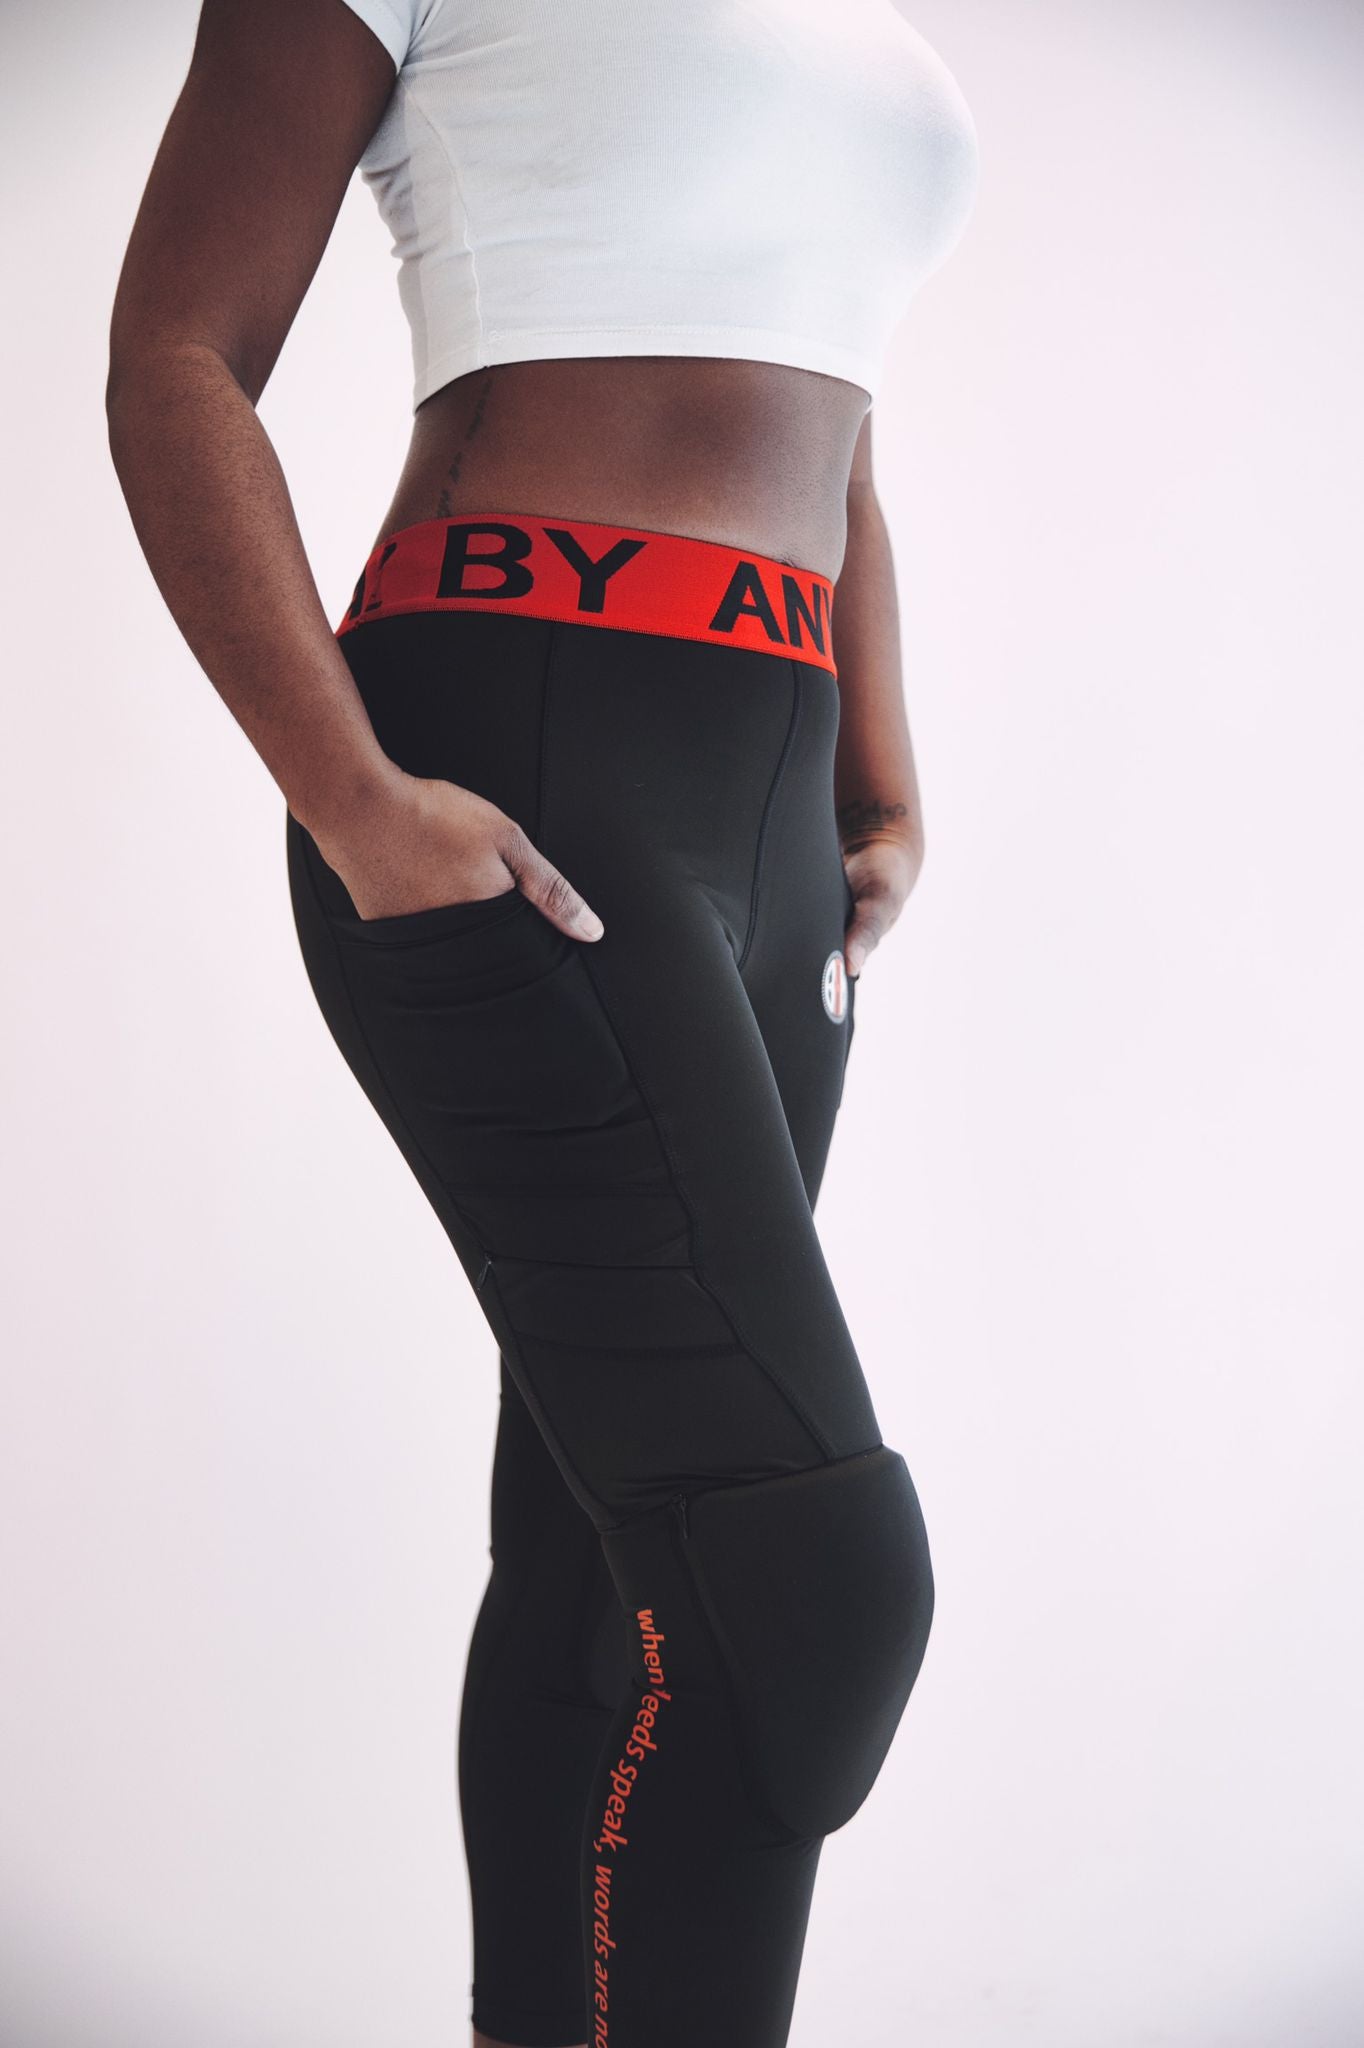 Women’s Comfortable Fitness Leggings with Removable Knee Pads and Zipper - Perfect for Active Women, Workouts, and Sports